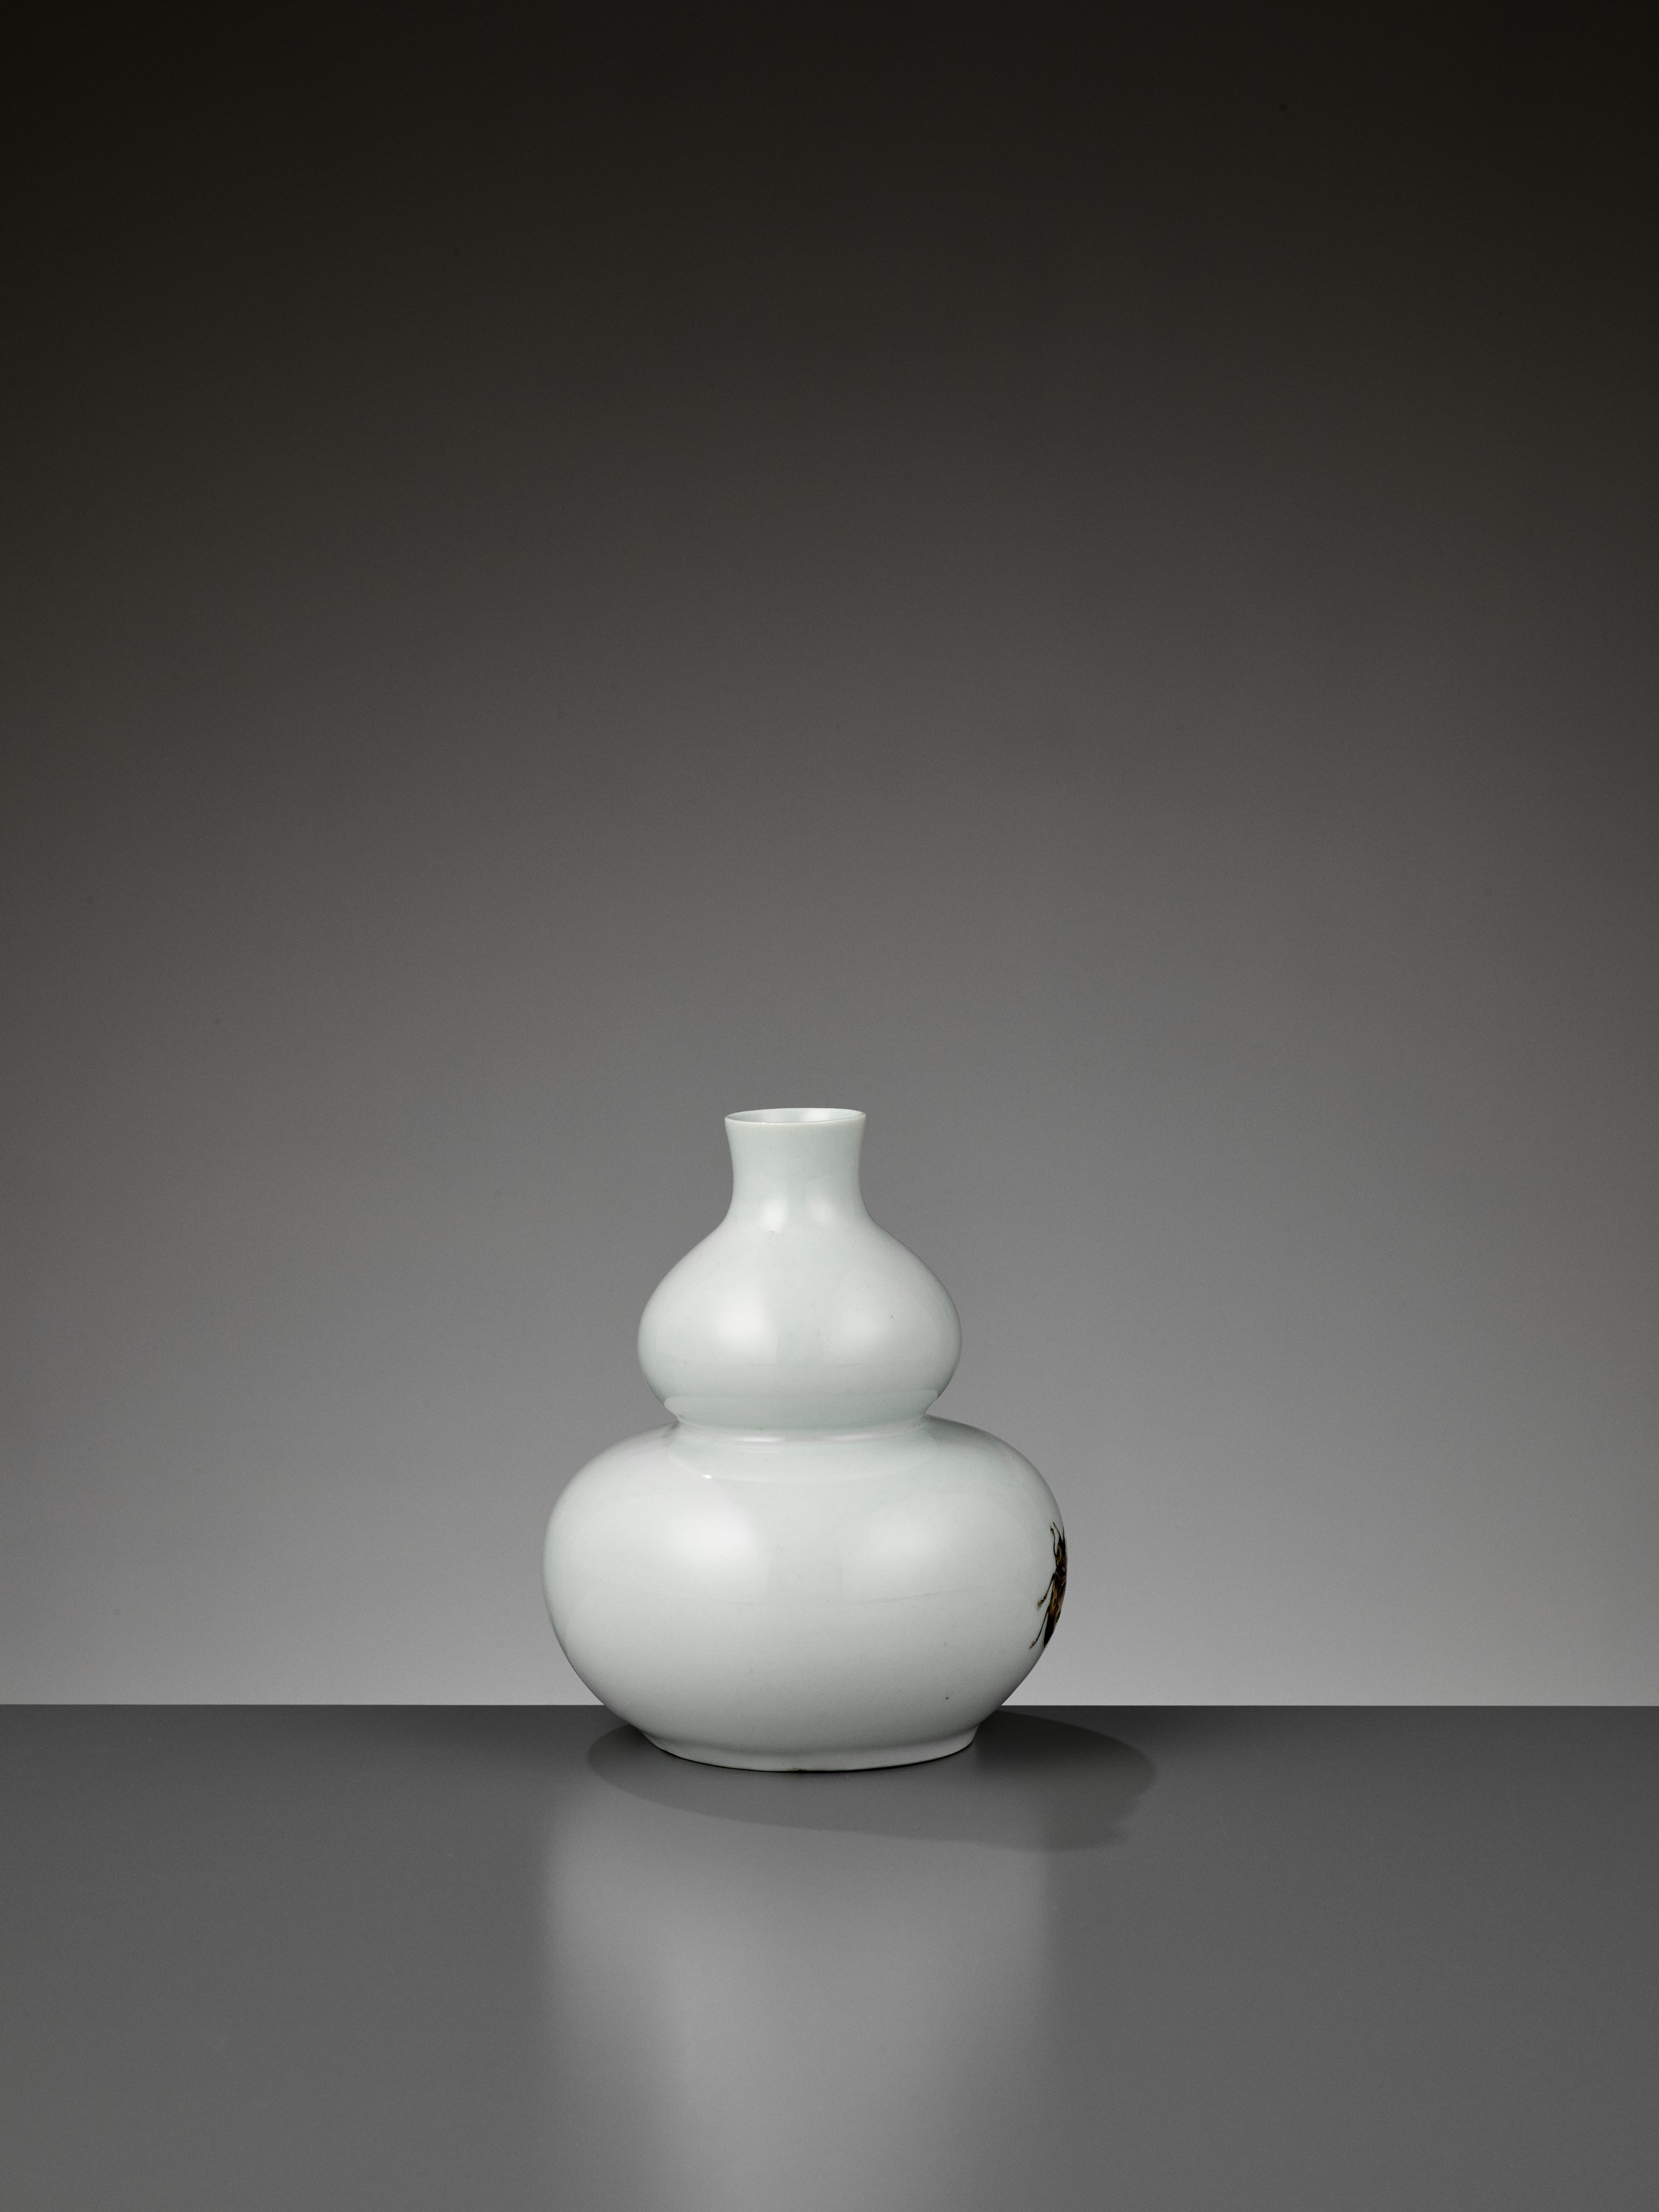 A 'TROMPE L'OEIL' PORCELAIN DOUBLE-GOURD VASE WITH A CICADA, BY MIDDLE KINGDOM PORCELAIN - Image 7 of 9